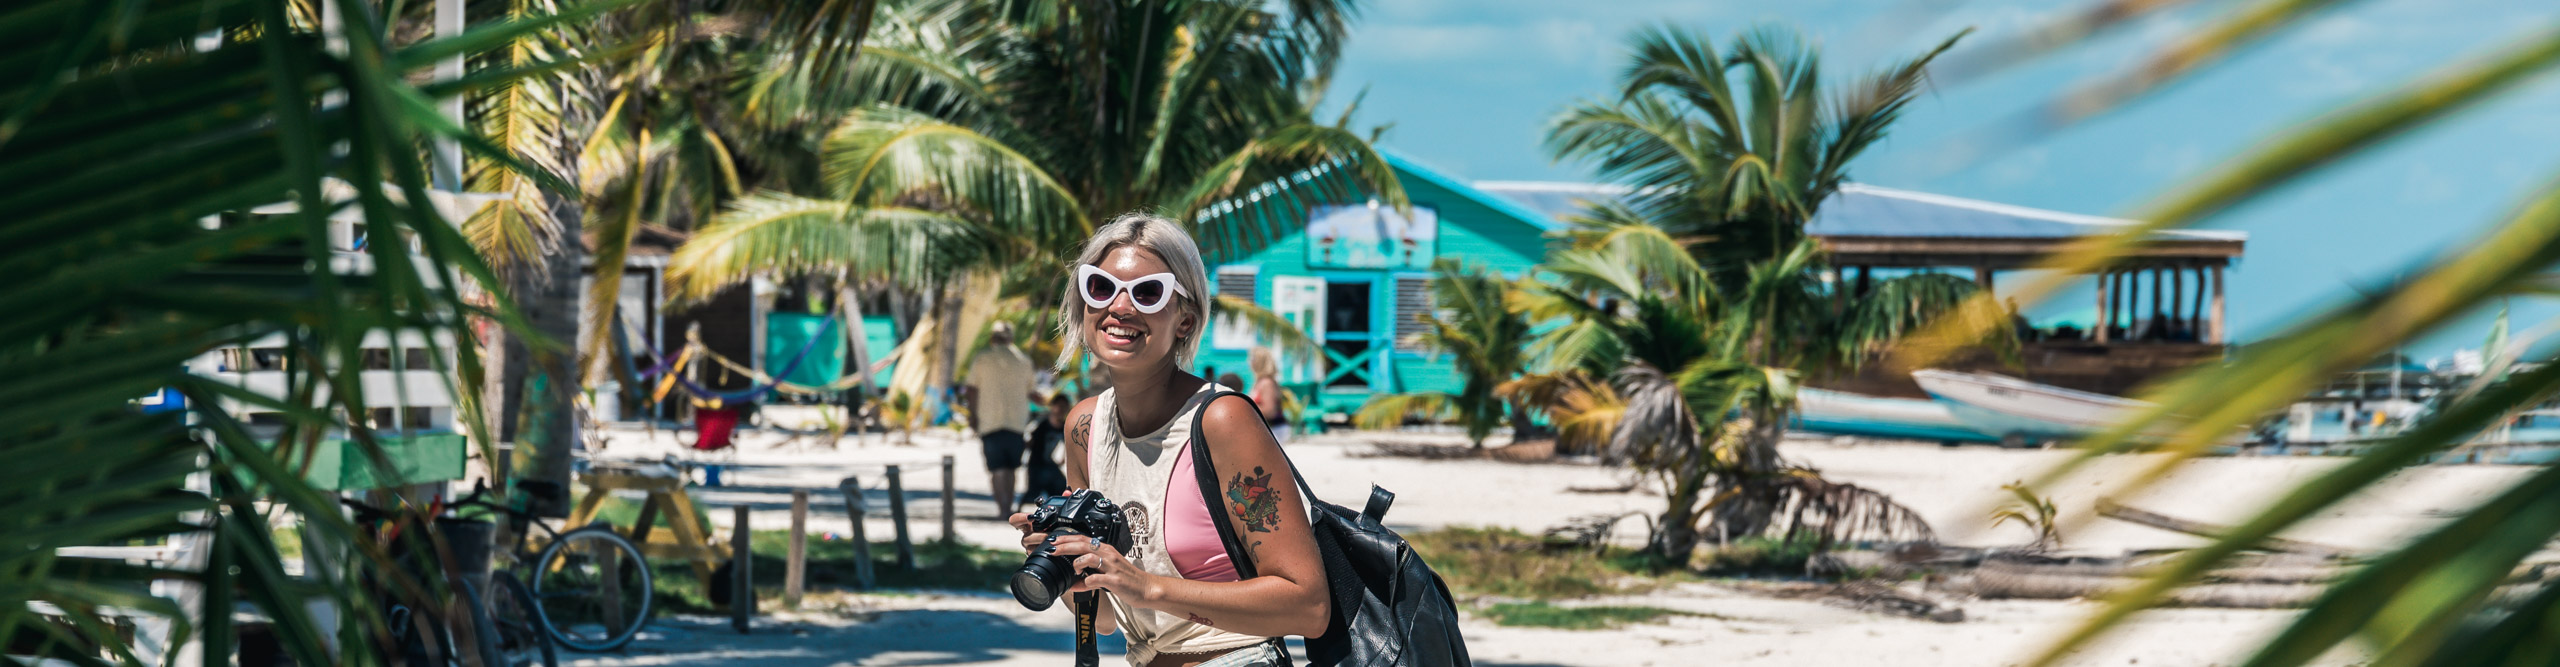 Woman laughing and smiling holding a camera near the beach, surrounded by palm trees, Belize